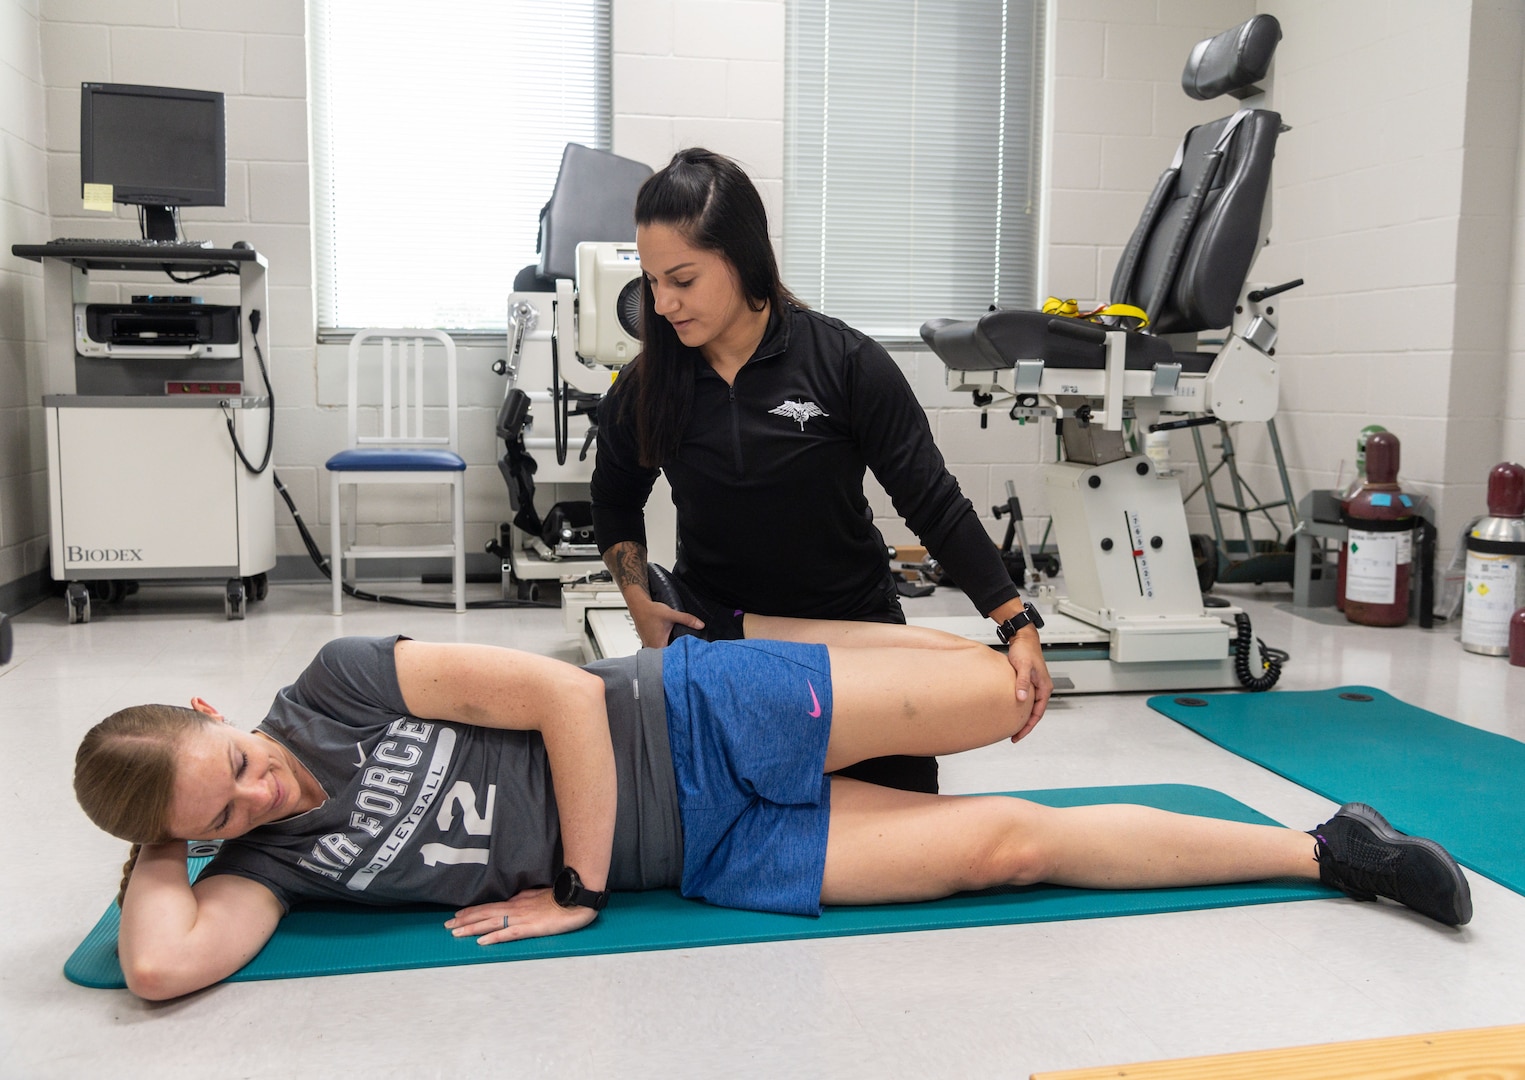 U.S. Air Force Staff Sgt. Emily Valdovinos (far center), Special Warfare Human Performance Squadron physical medicine technician, works with Maj. Nichole Ayers (near center), NASA astronaut candidate, on routine mobility exercises at the Johnson Space Center in Houston, Texas, Jun. 16, 2022. Valdovinos was hand-selected by the NASA Astronaut Strength, Conditioning and Rehab Group to help develop personalized strength, conditioning, and rehabilitative plans for NASA astronauts.